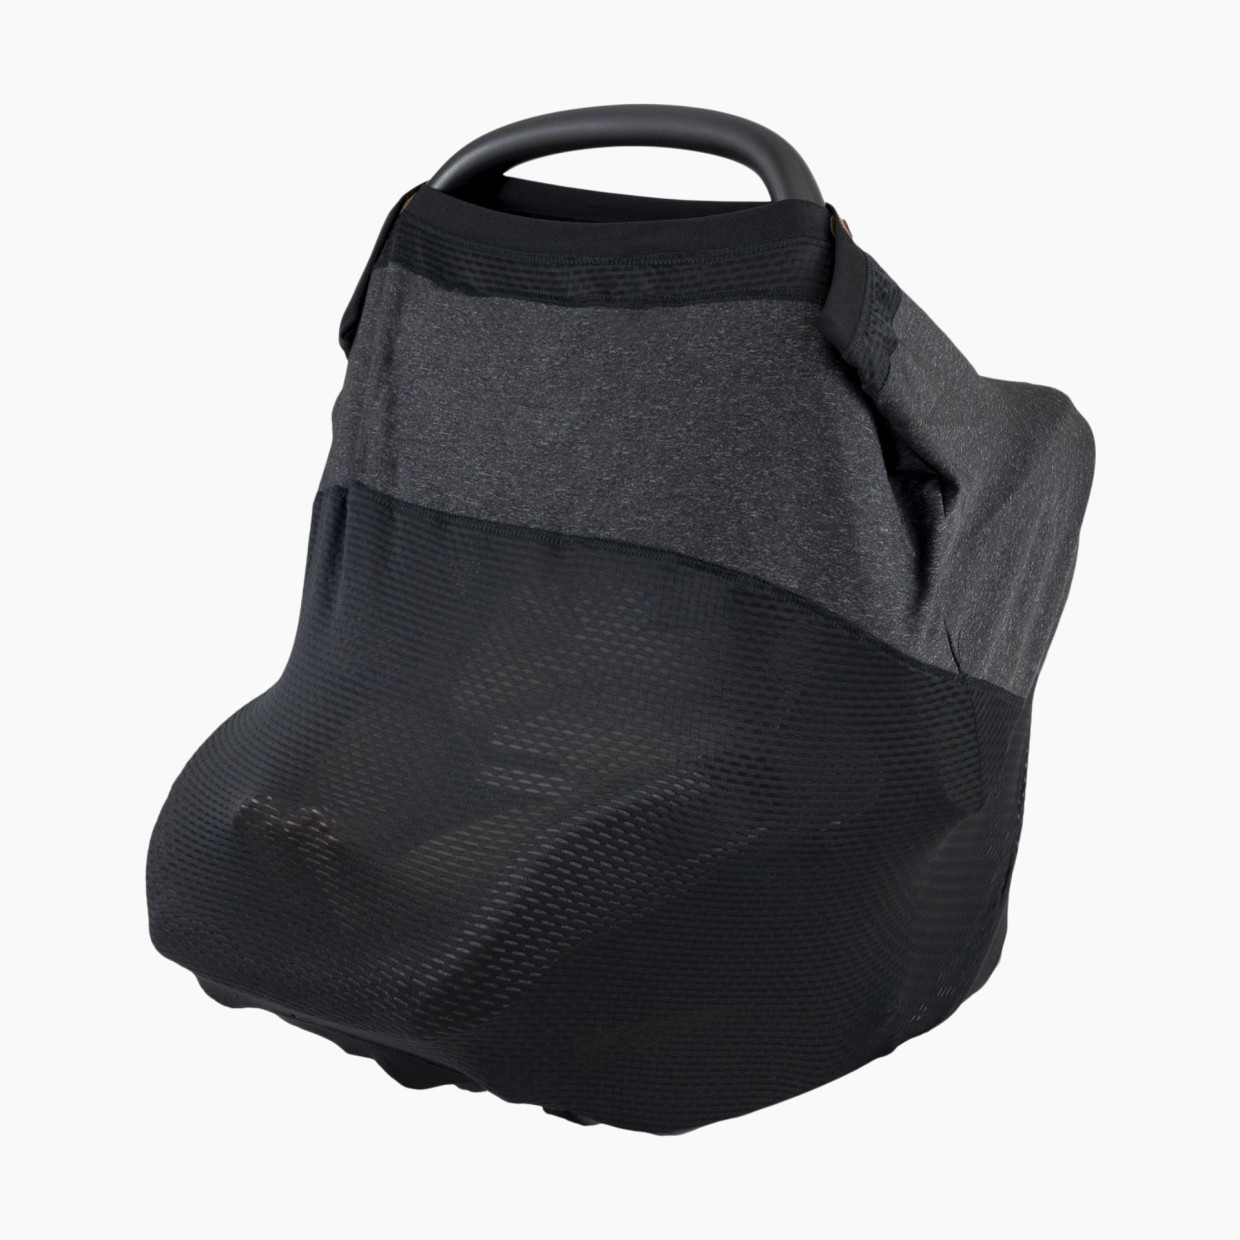 Boppy 4 & More Multi-Use Cover - Charcoal.